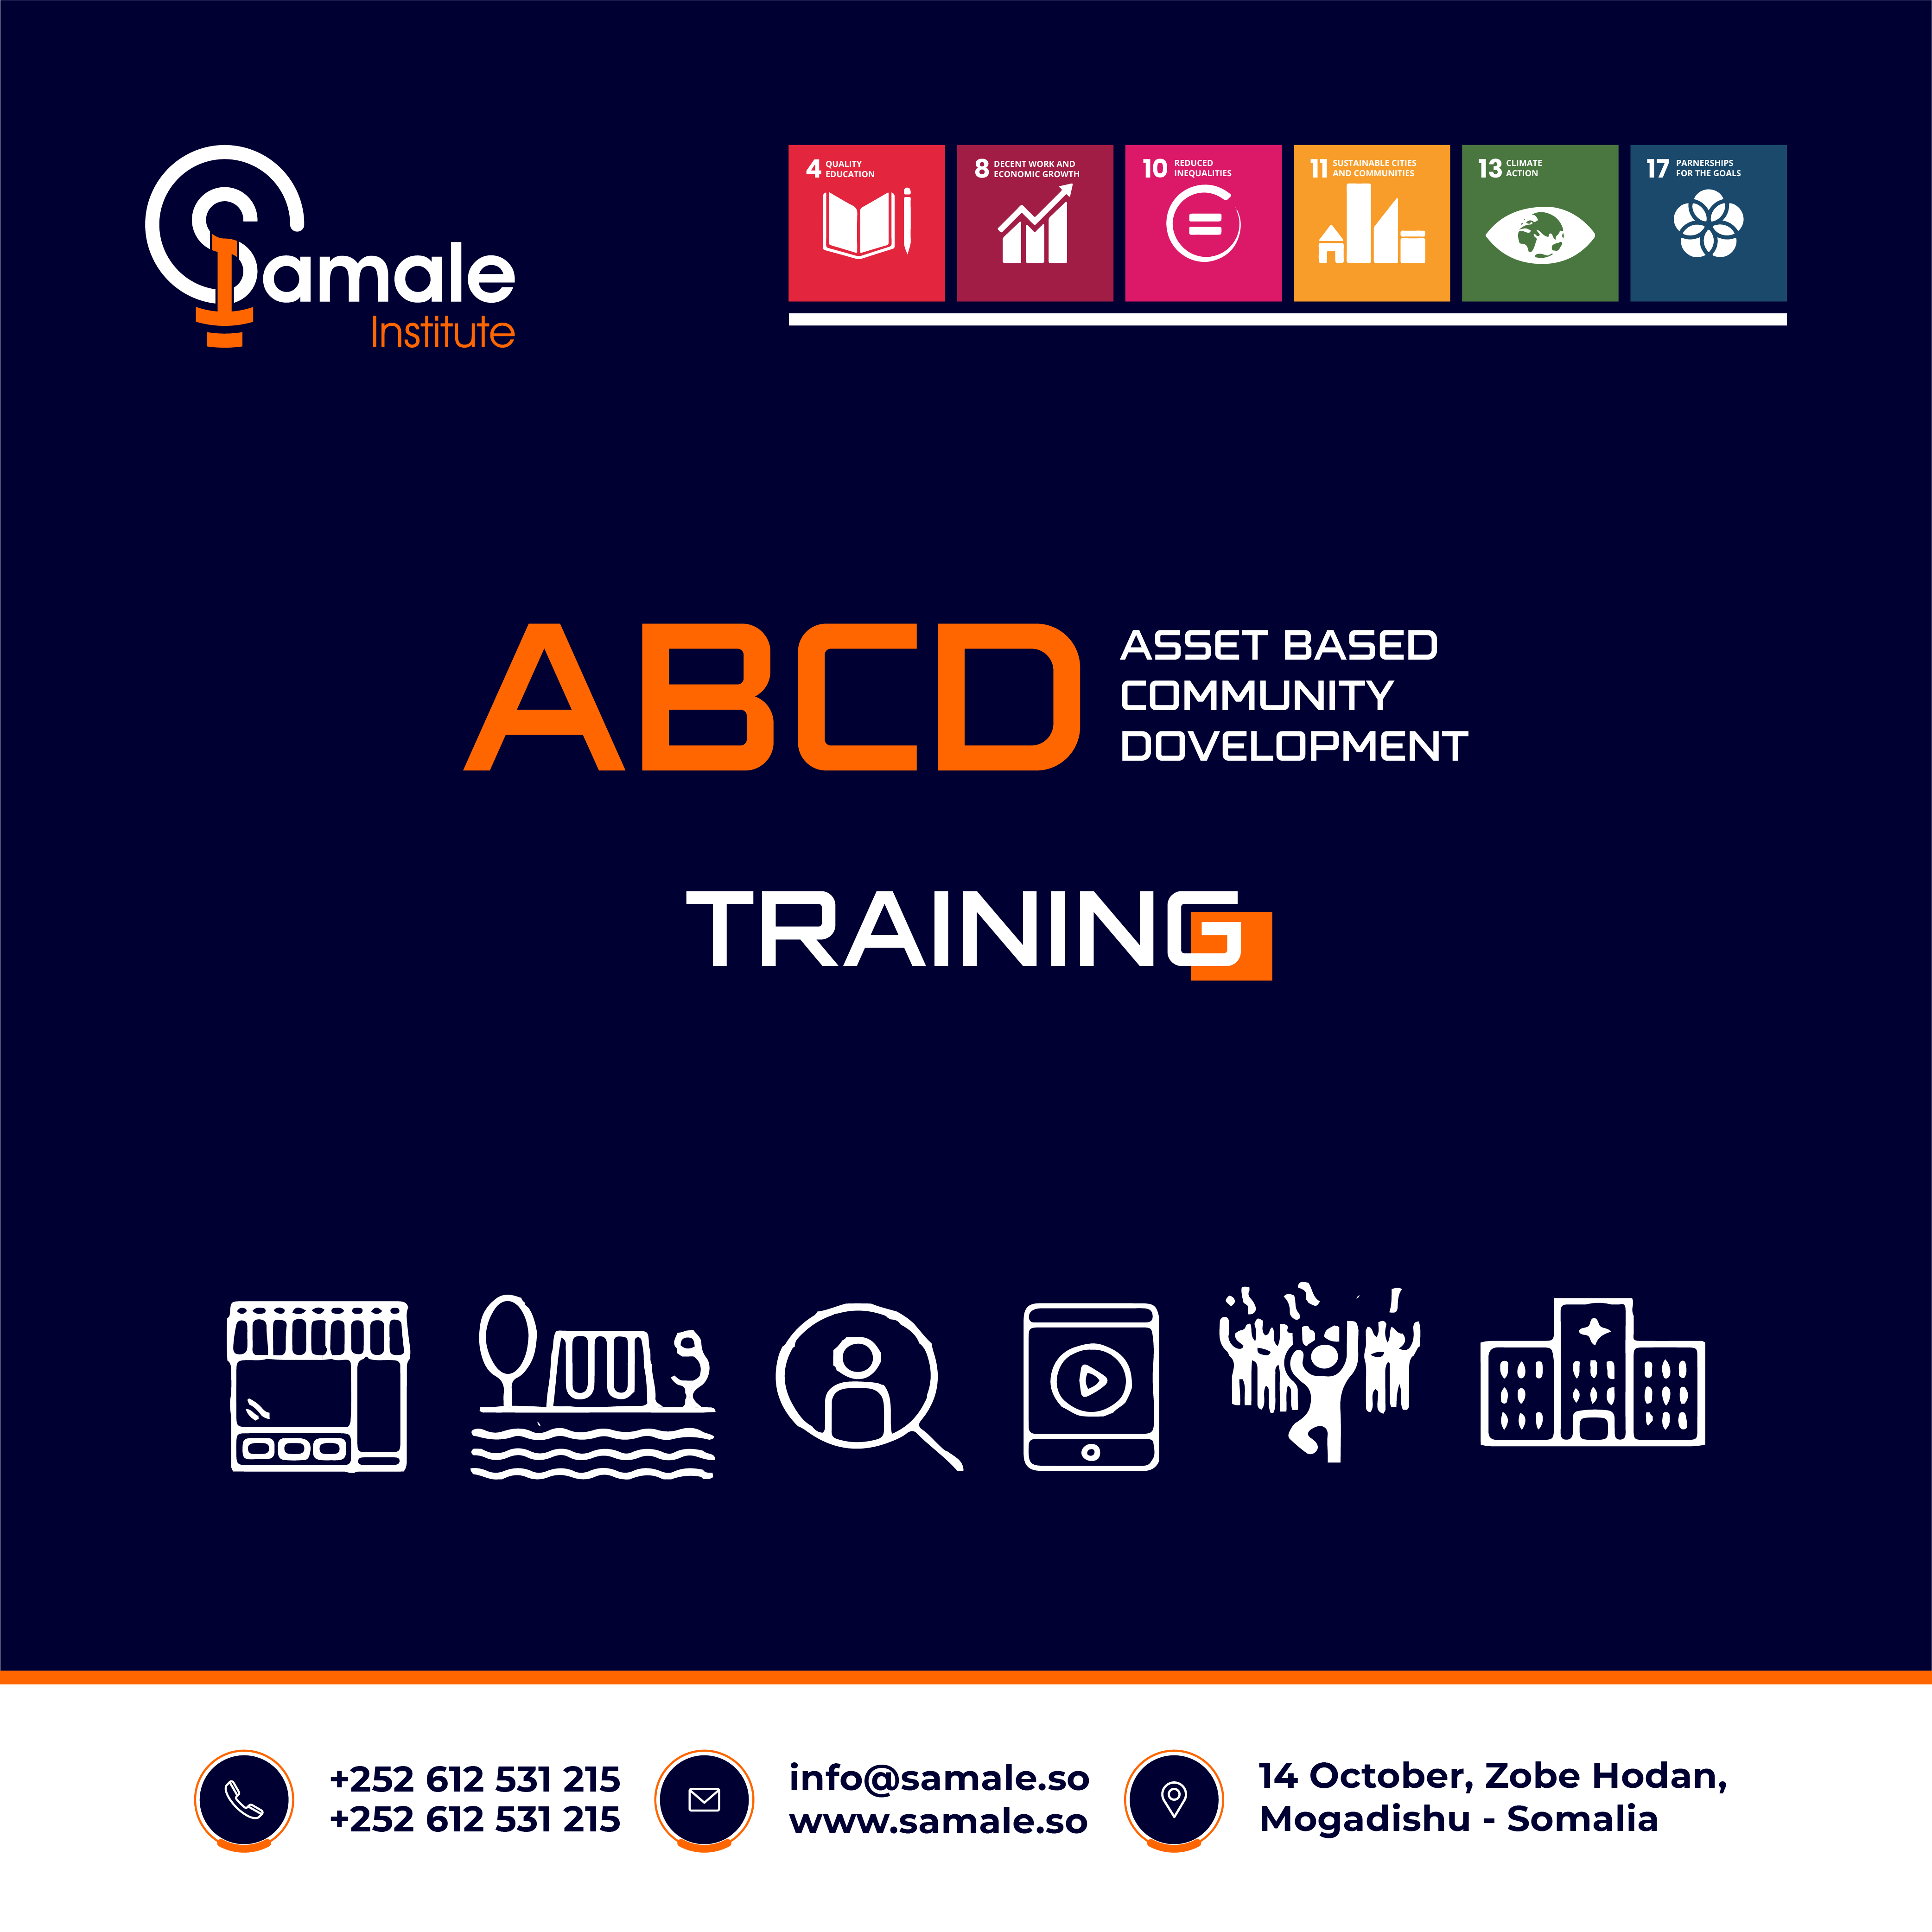 Training on ABCD